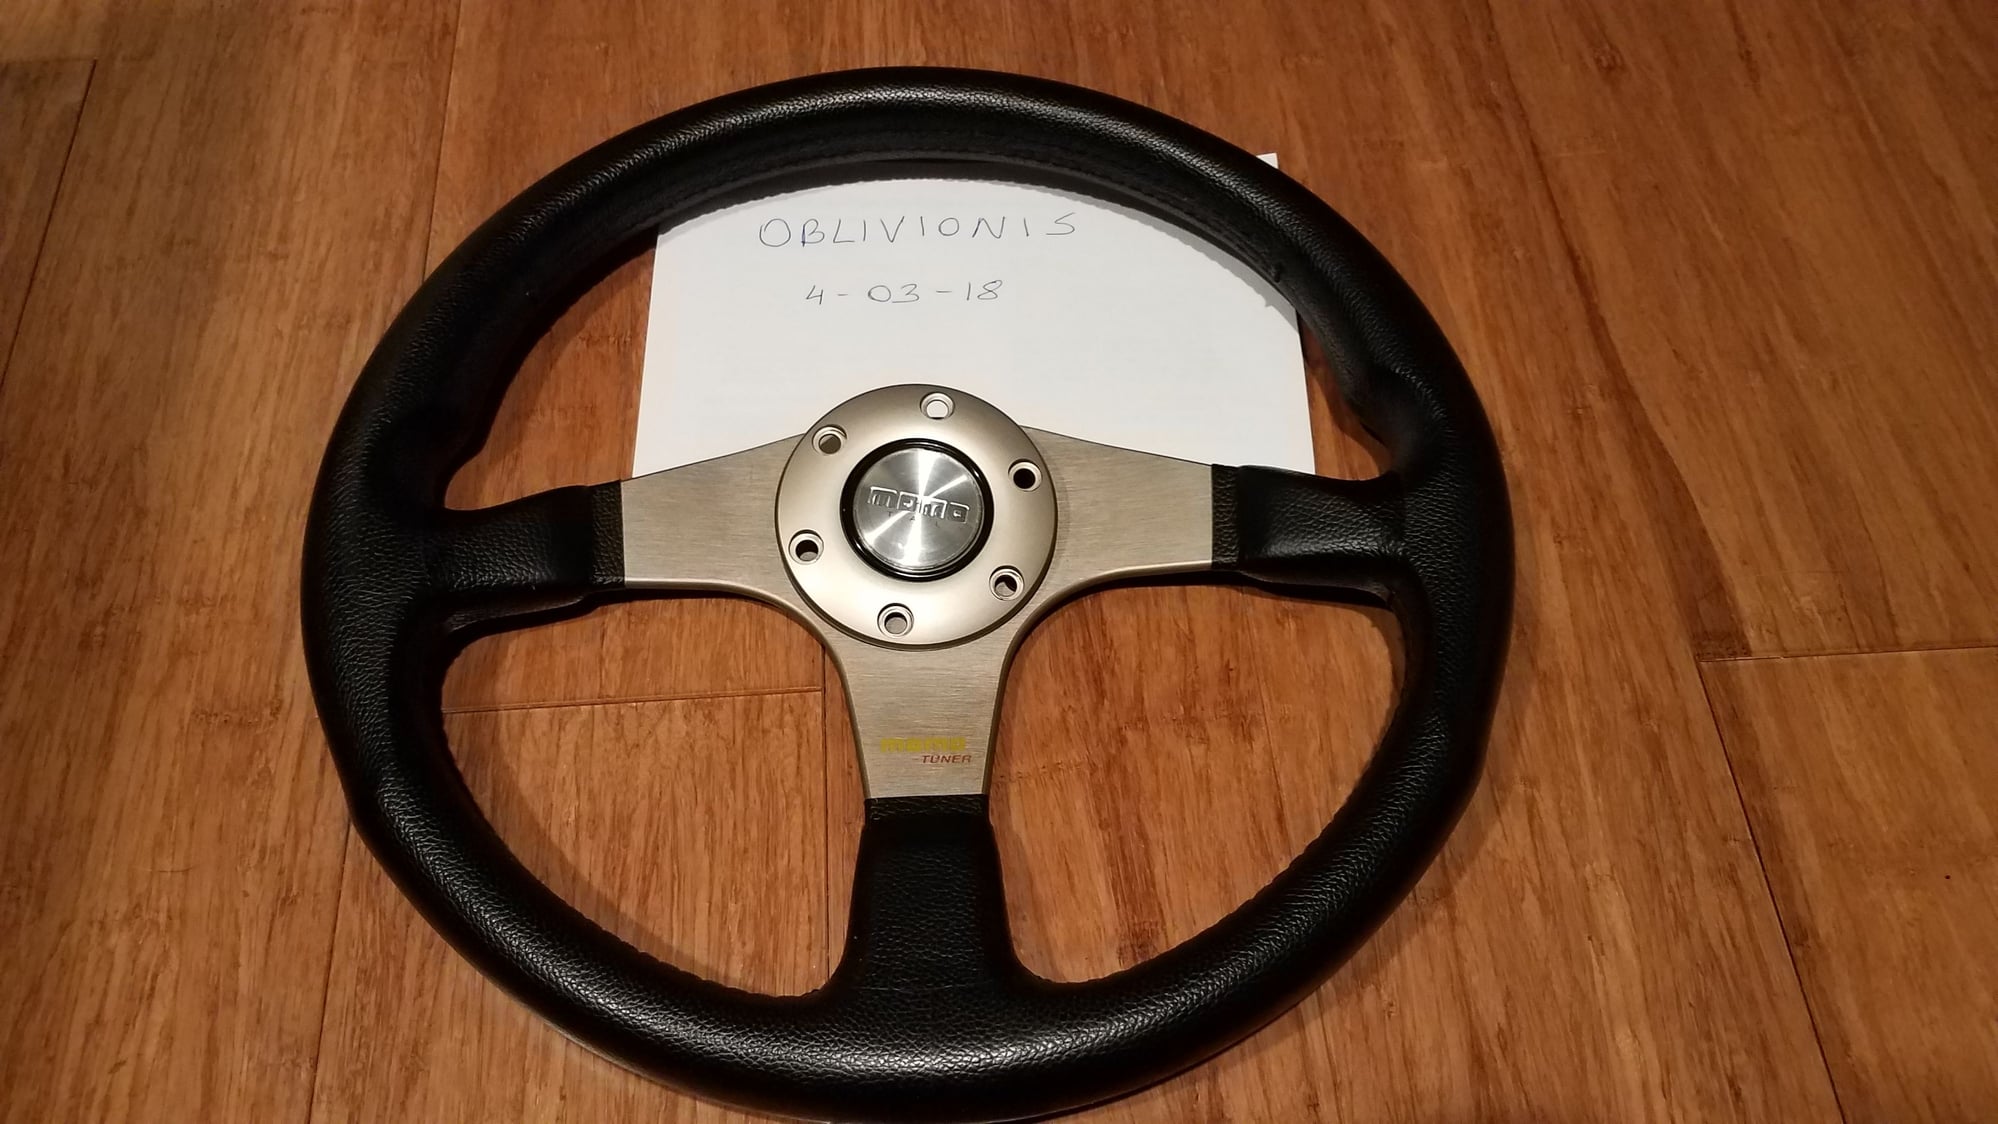 Steering/Suspension - MOMO steering wheel with NRG quick release - Used - 2008 to 2015 Mitsubishi Lancer Evolution - Barrington, IL 60010, United States